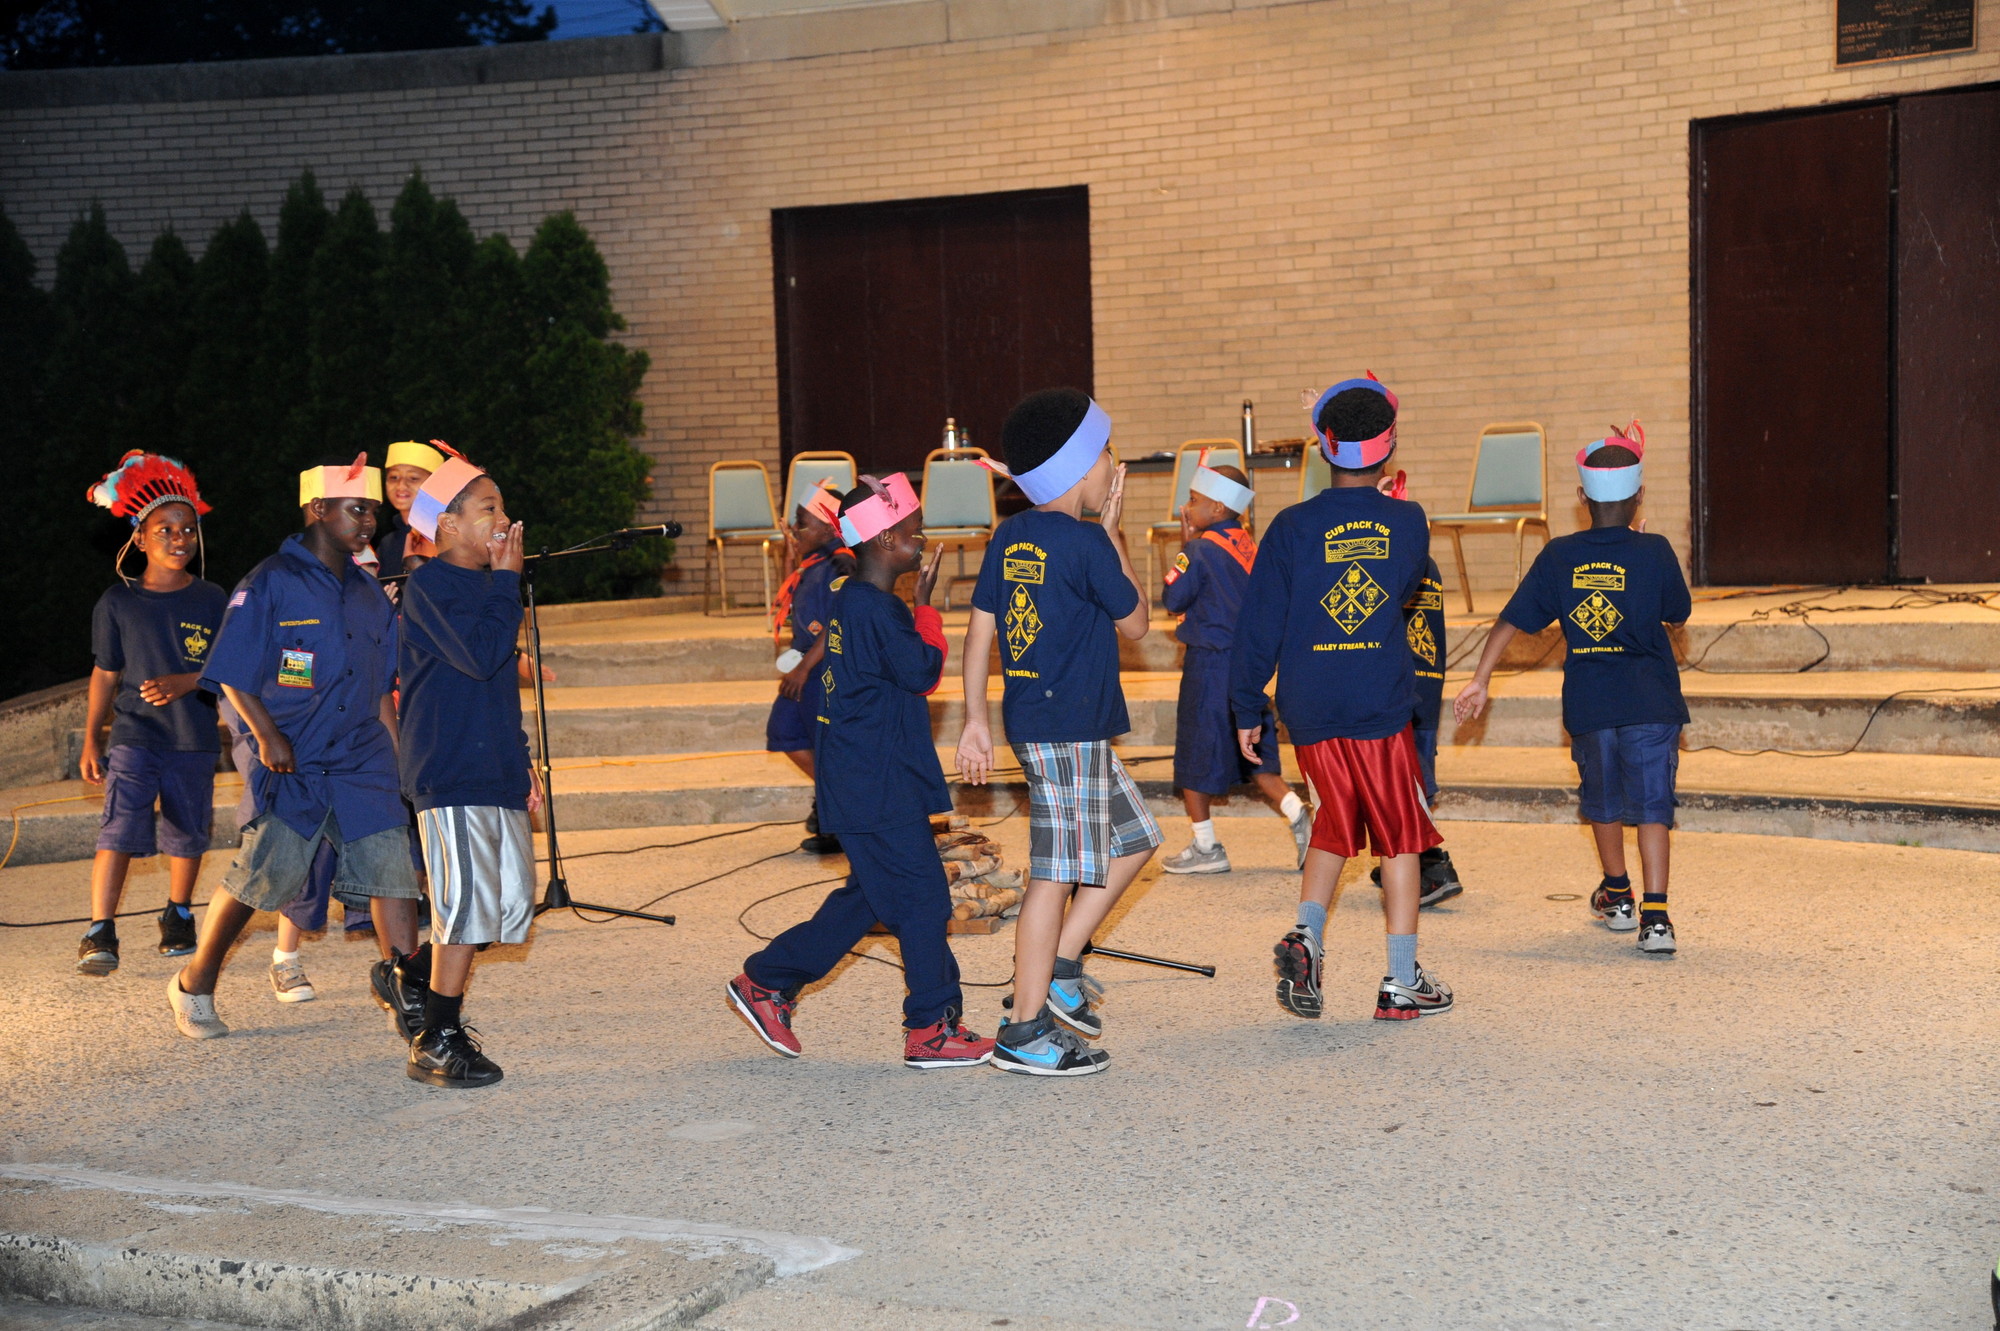 Pack 106 Cub Scouts demonstrated how Indians told time during their skit last Saturday night.